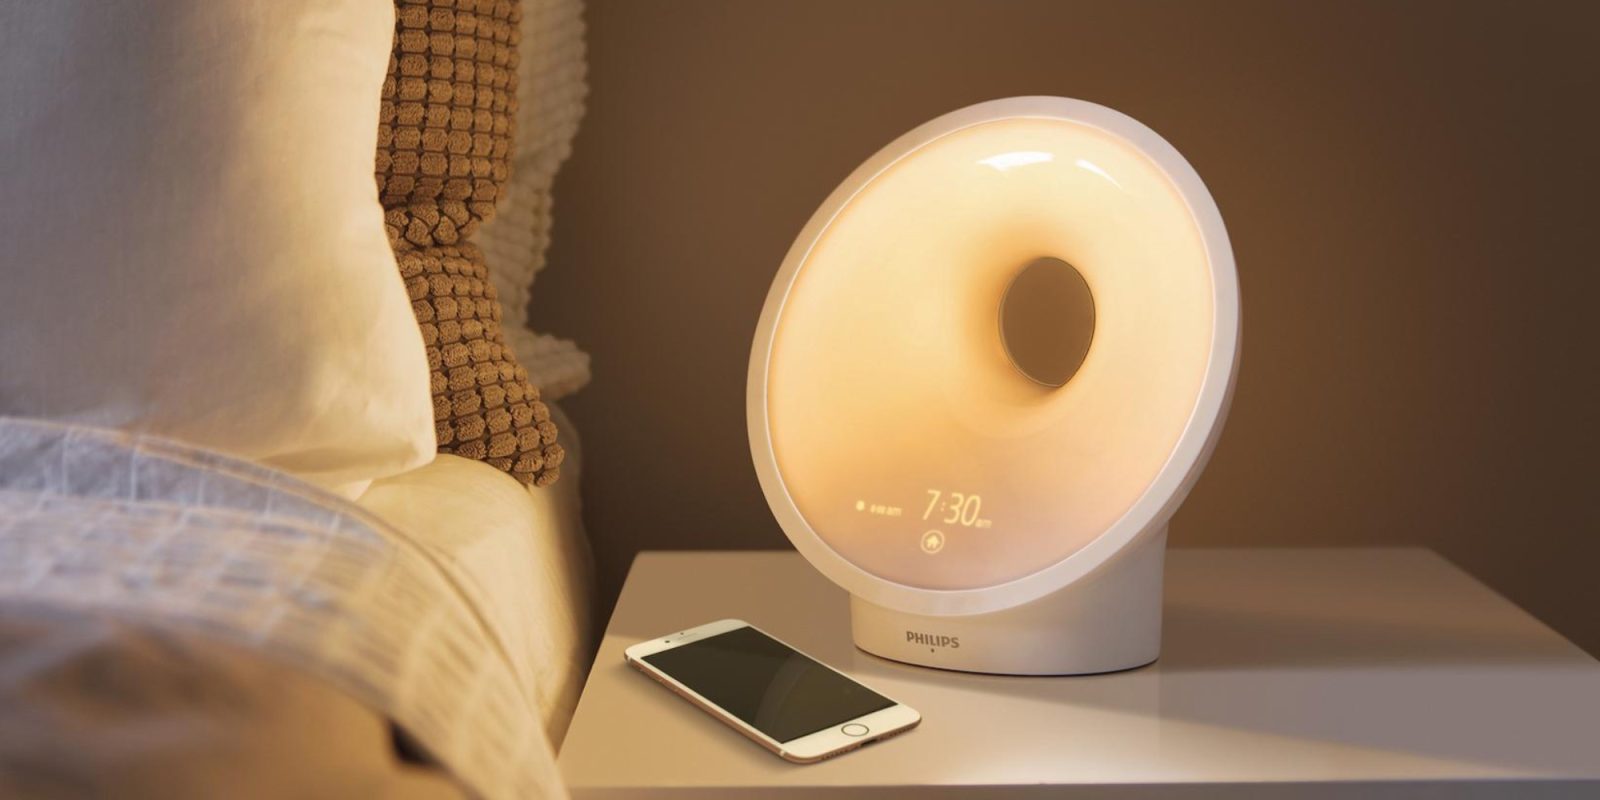 Artificial wake up lamp that helps prevent jet lag